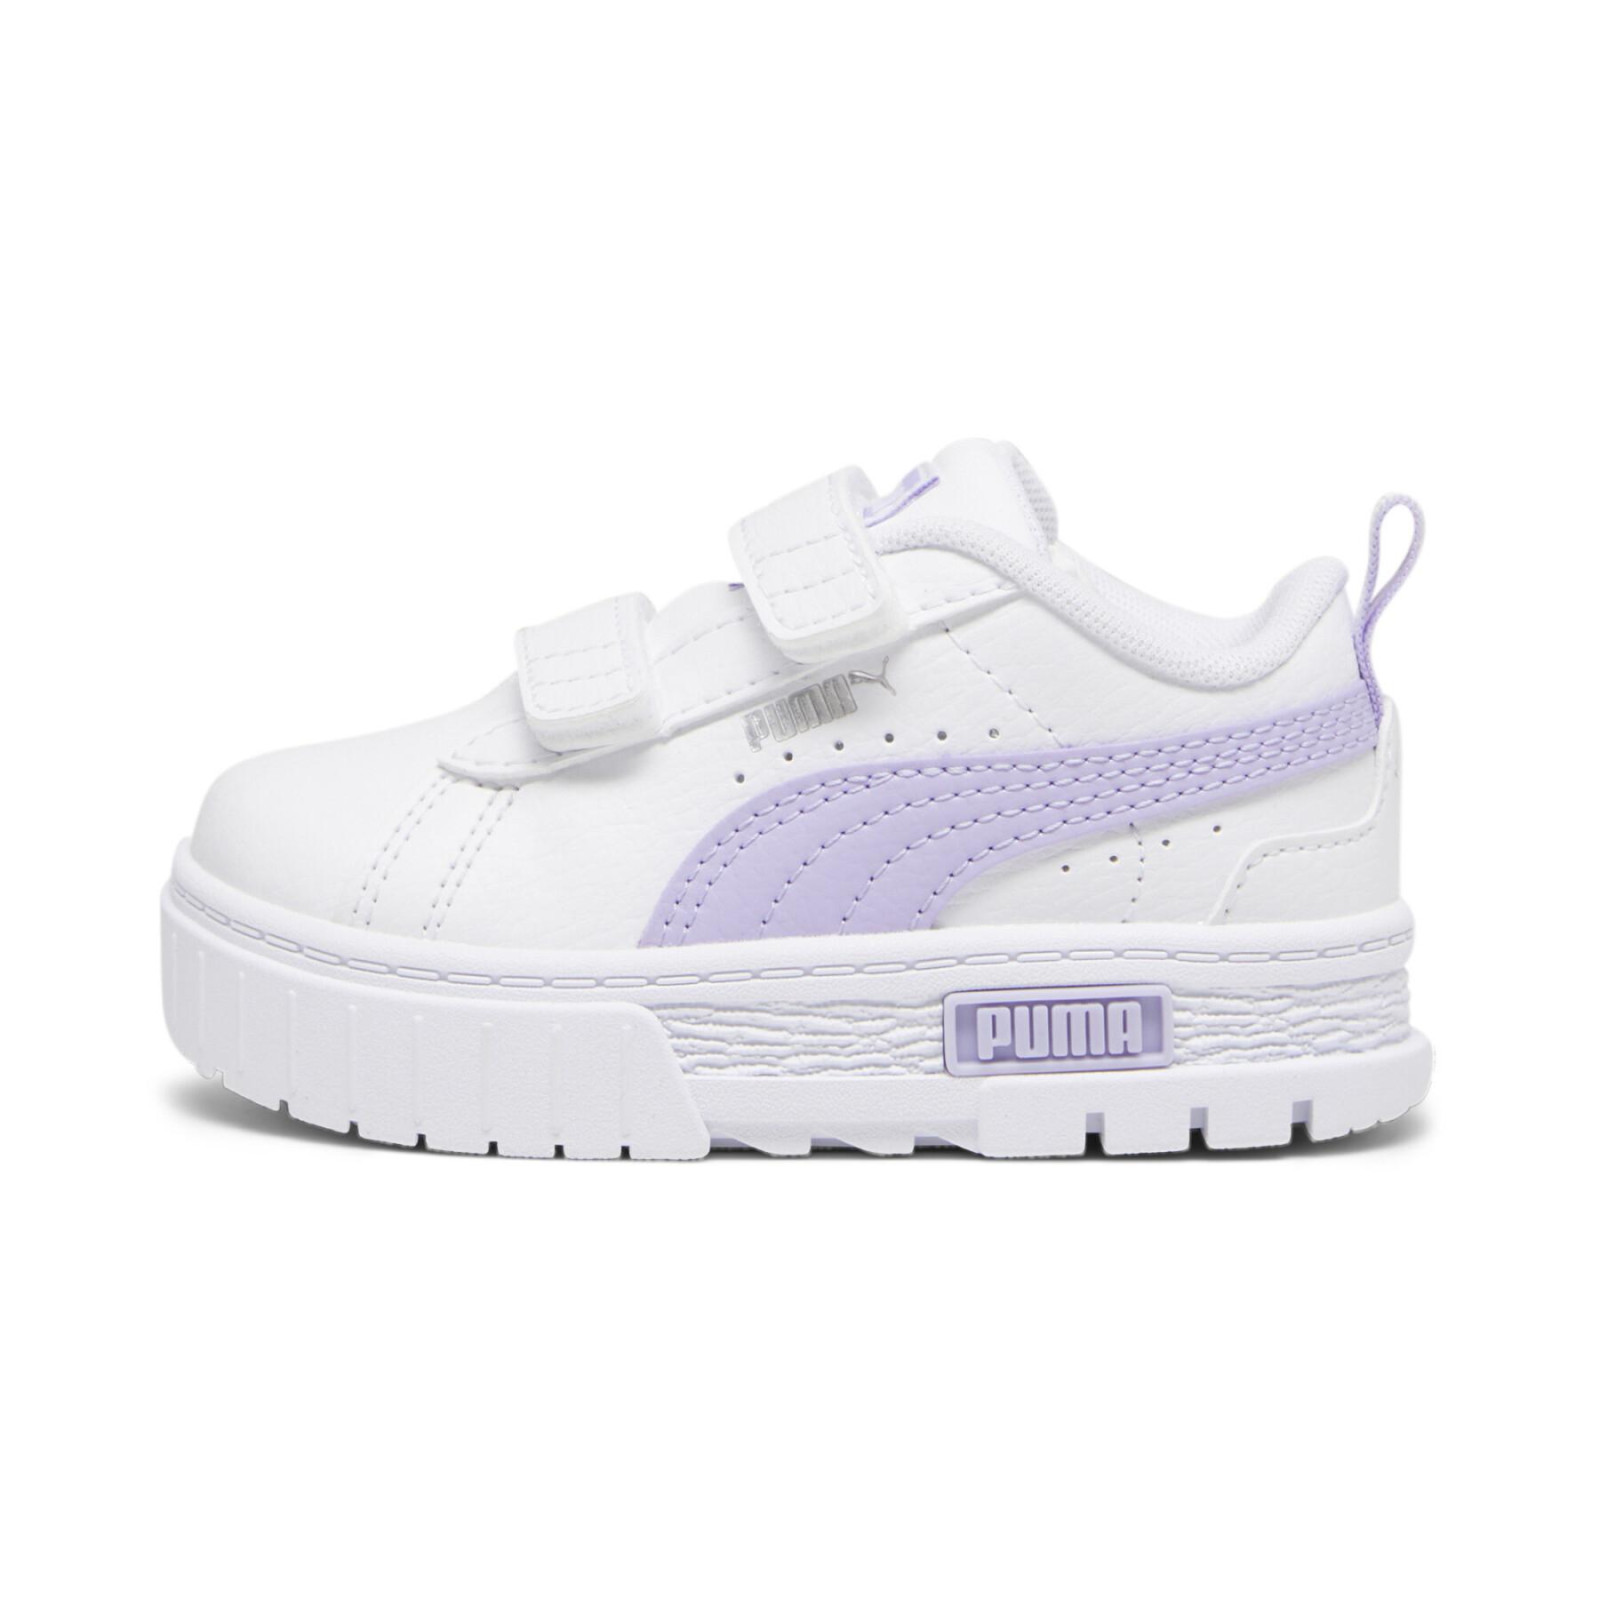 PUMA MAYZE LTH VELCRO INF WHITE VIOLET 21-27 Taille 21